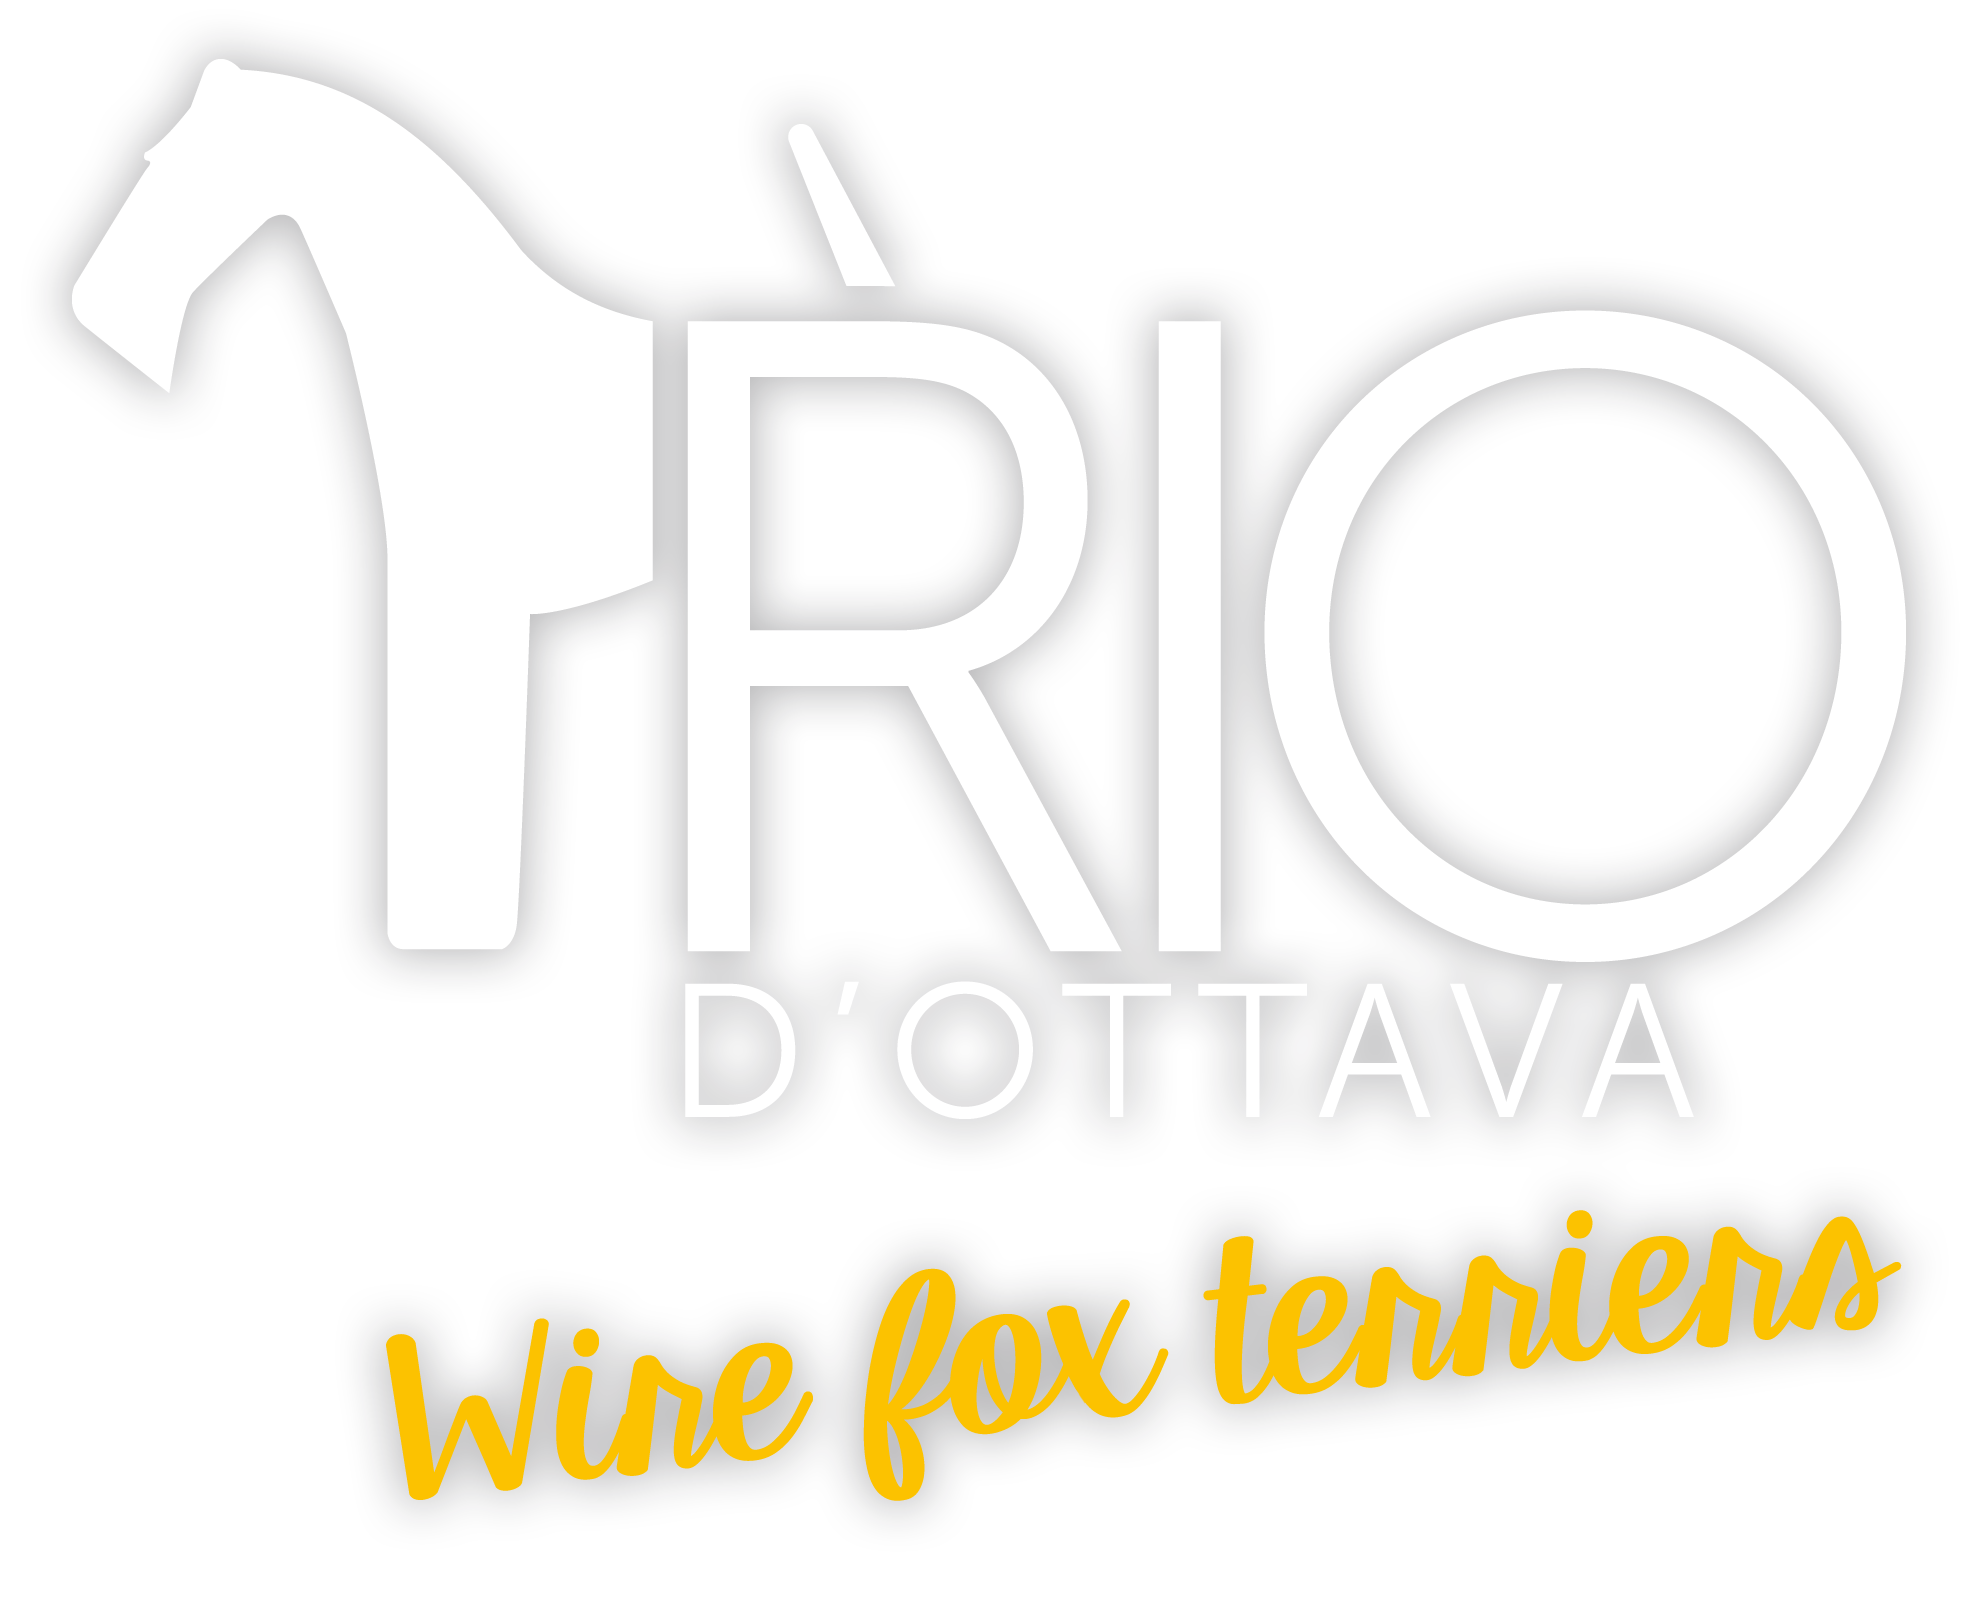 Rio d'Ottava Wire Fox Terriers by Andrea Murtula – Big logo with payoff